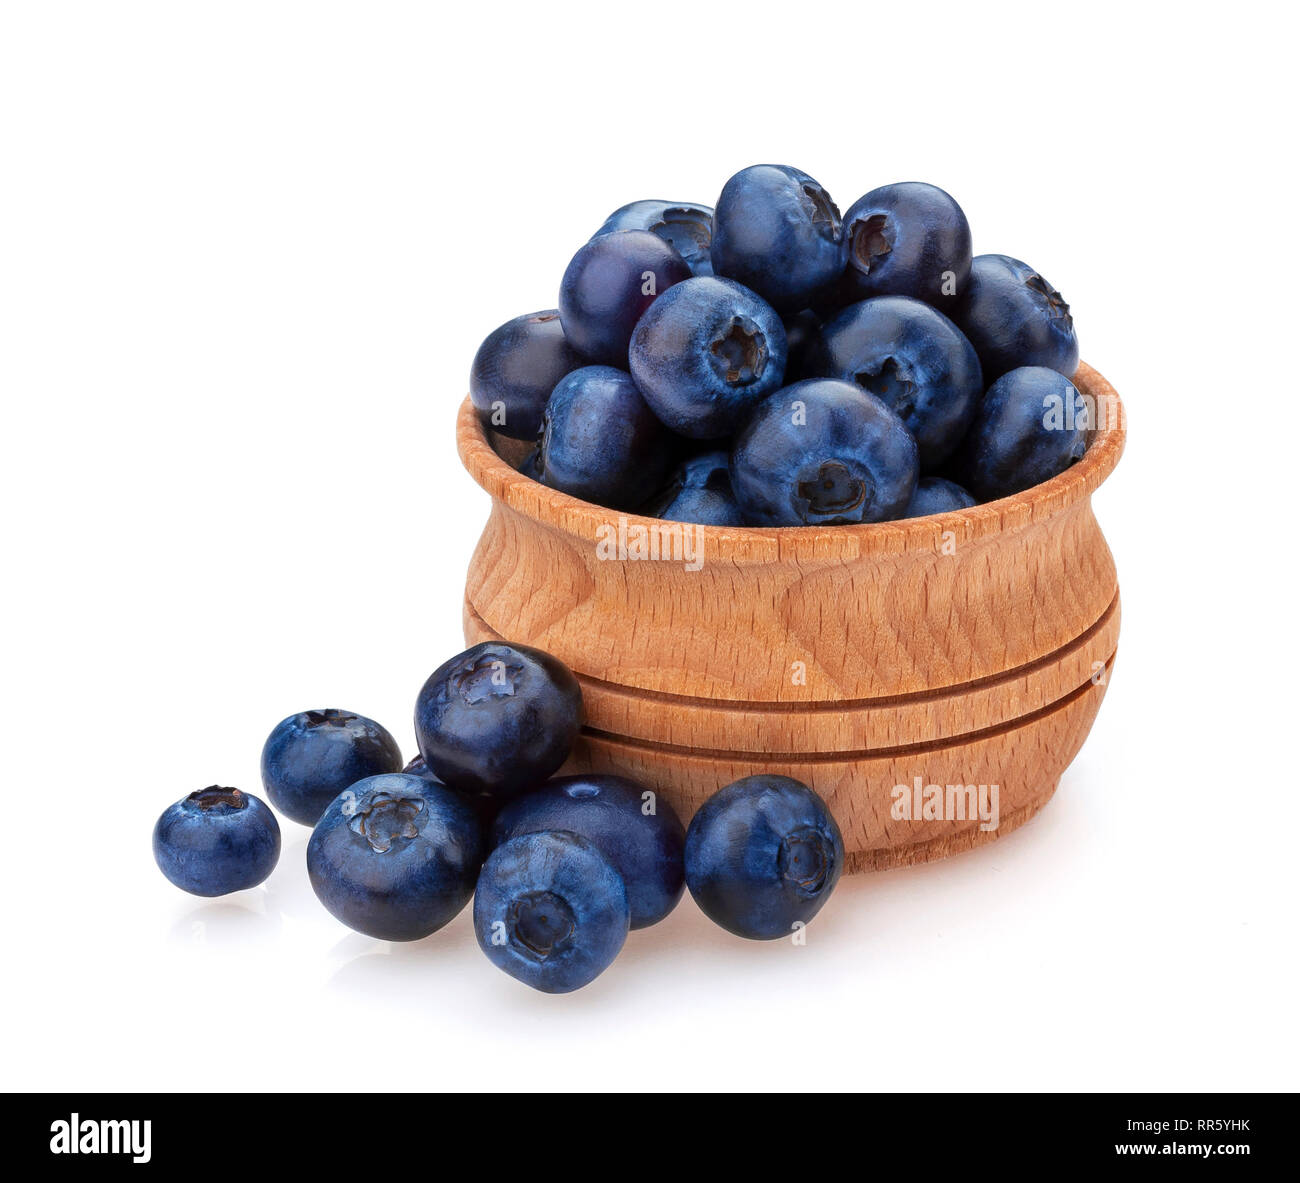 Blueberry isolated on white background. A pile of fresh blueberries in a wooden bowl Stock Photo